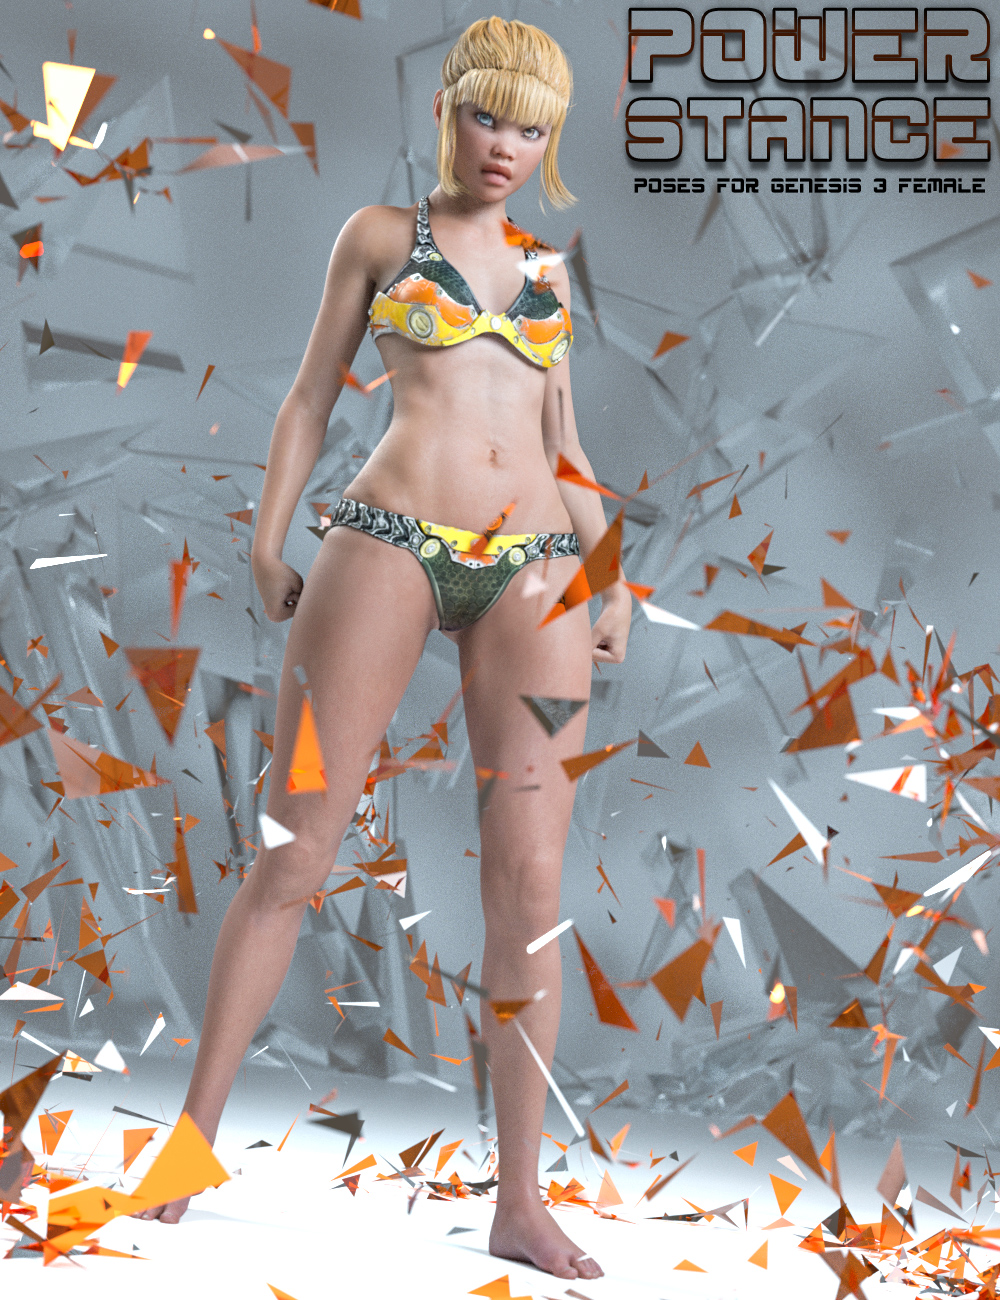 Power Stance Poses for Genesis 3 Female(s) by: Aeon Soul, 3D Models by Daz 3D